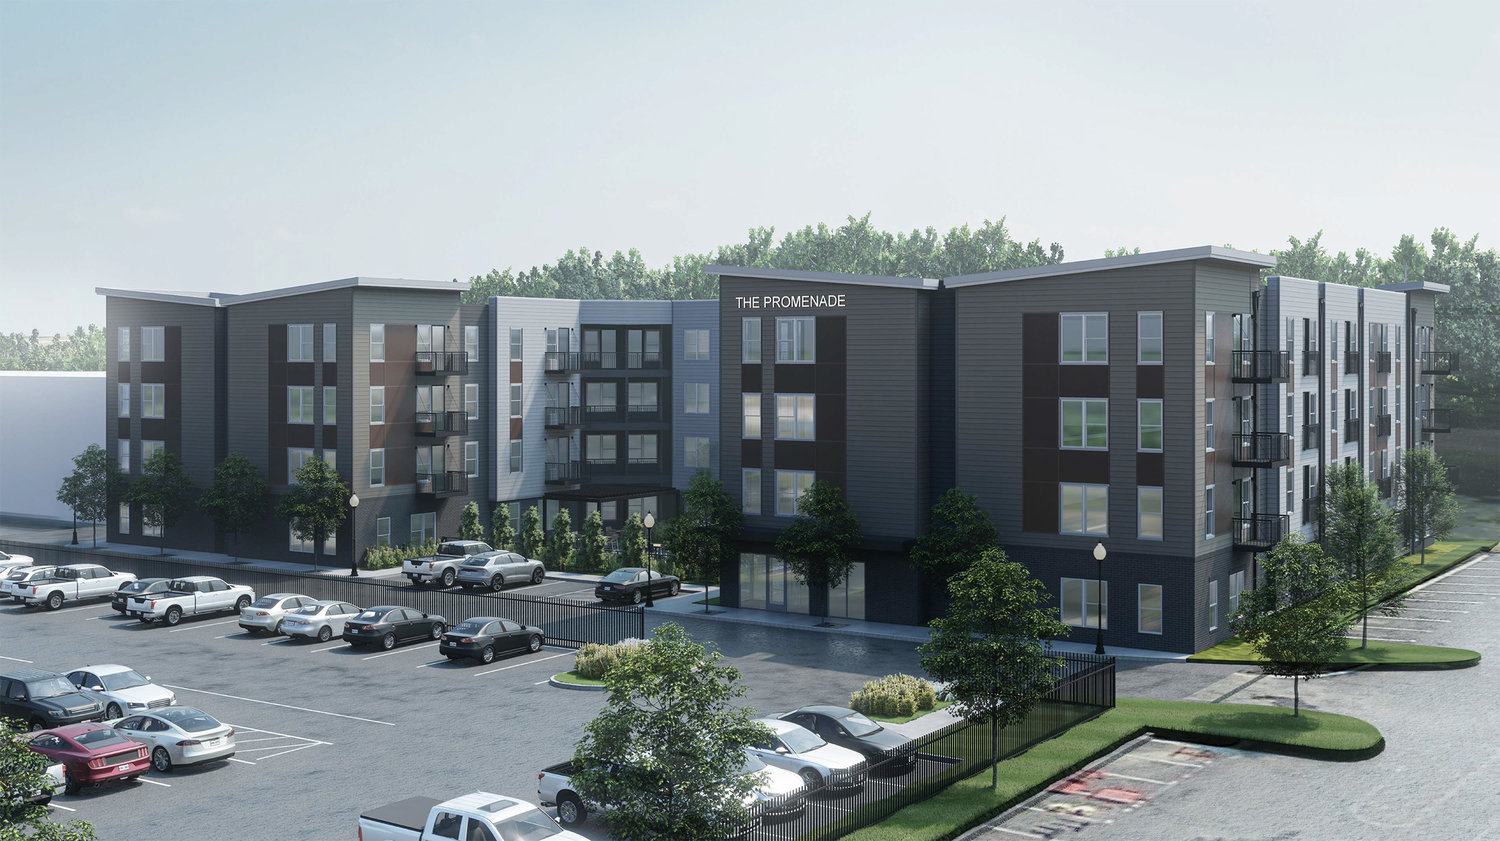 MALL APARTMENTS — A developer is asking Warrenton to help secure tax breaks for proposed construction of a four-story apartment building at the Shoppes at Warrenton mall. This image provided by the developer shows a rendering of the proposed building.